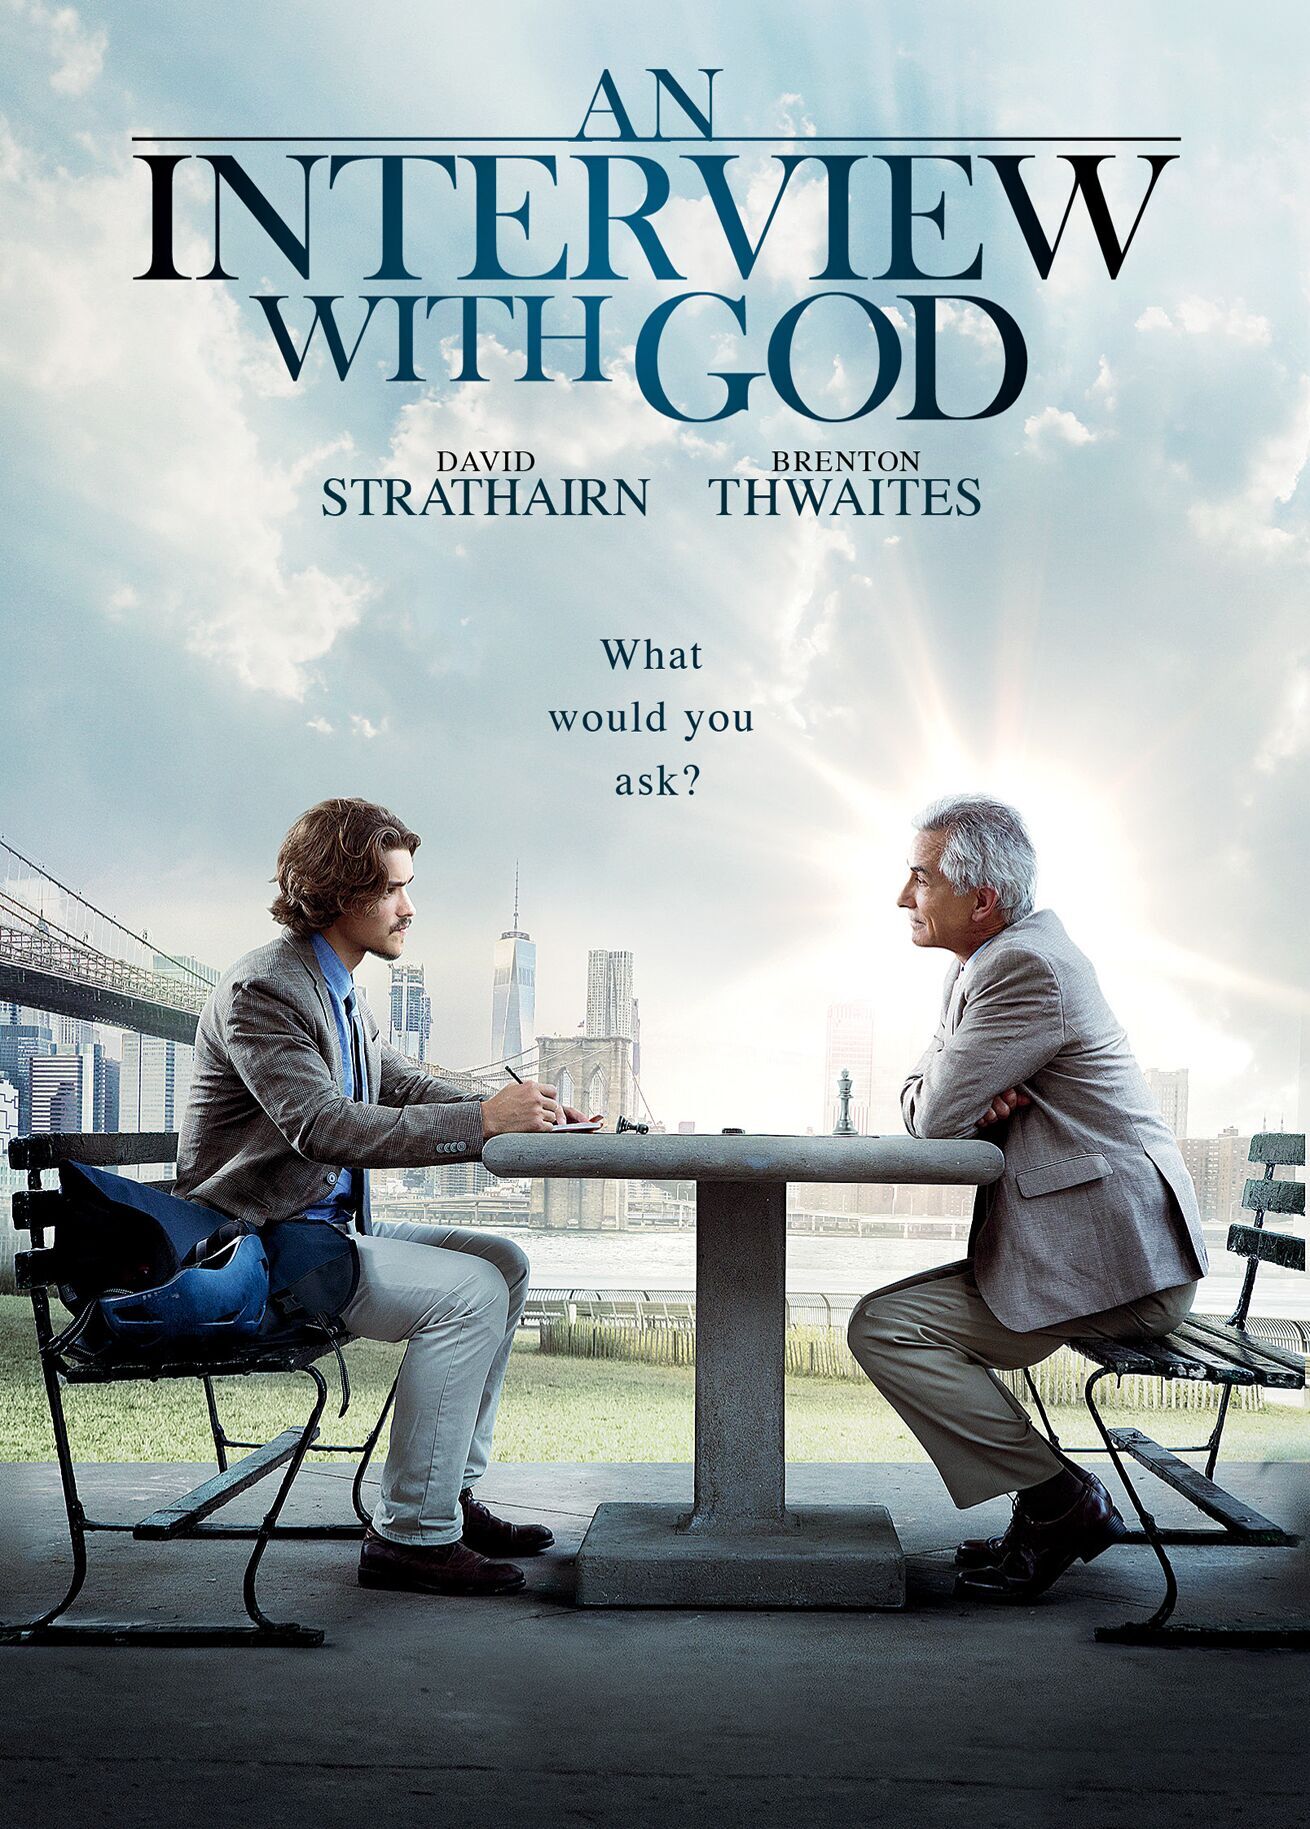 An Interview With God - DVD [ 2018 ]  - Drama Movies On DVD - Movies On GRUV